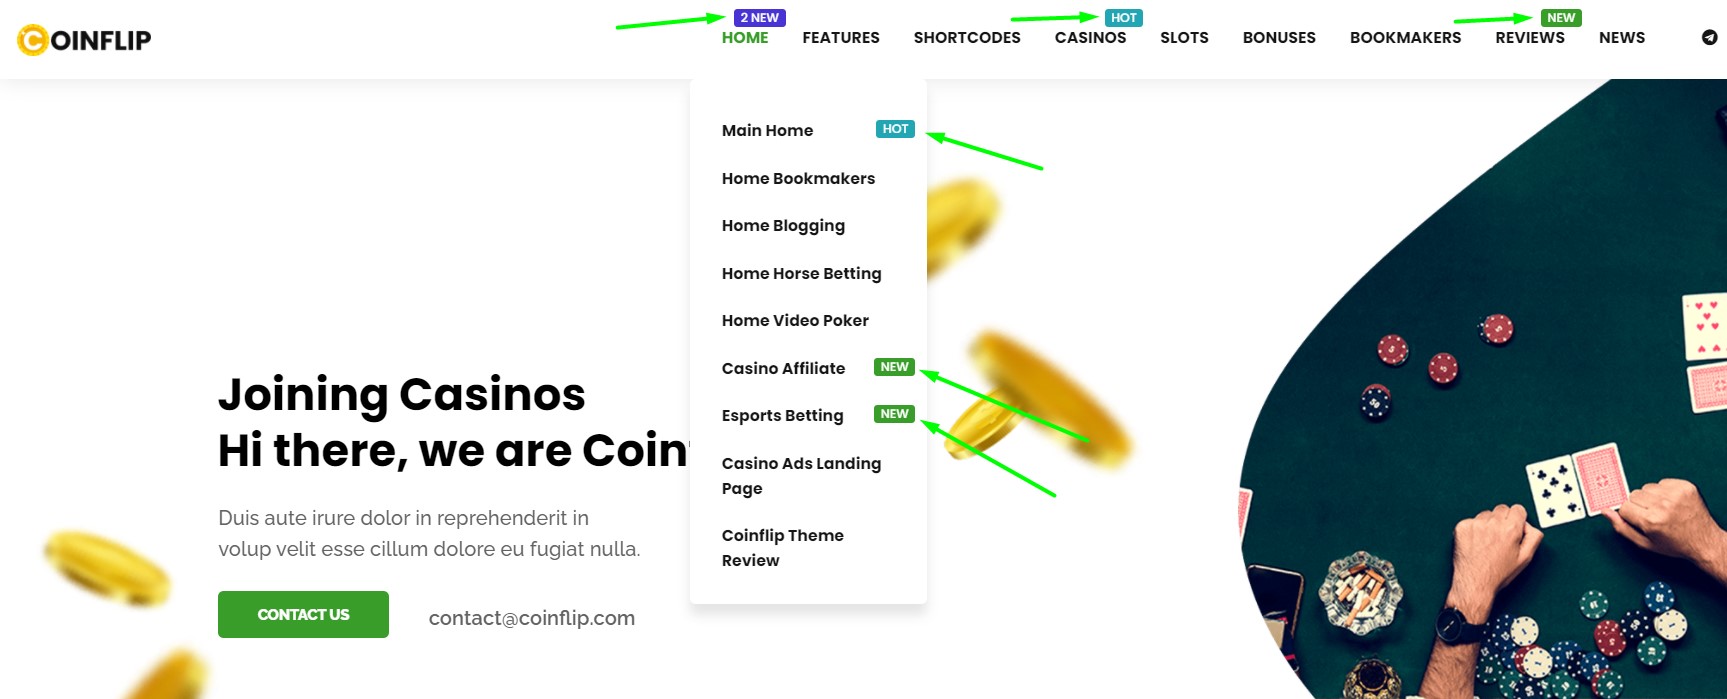 coinflip-badges